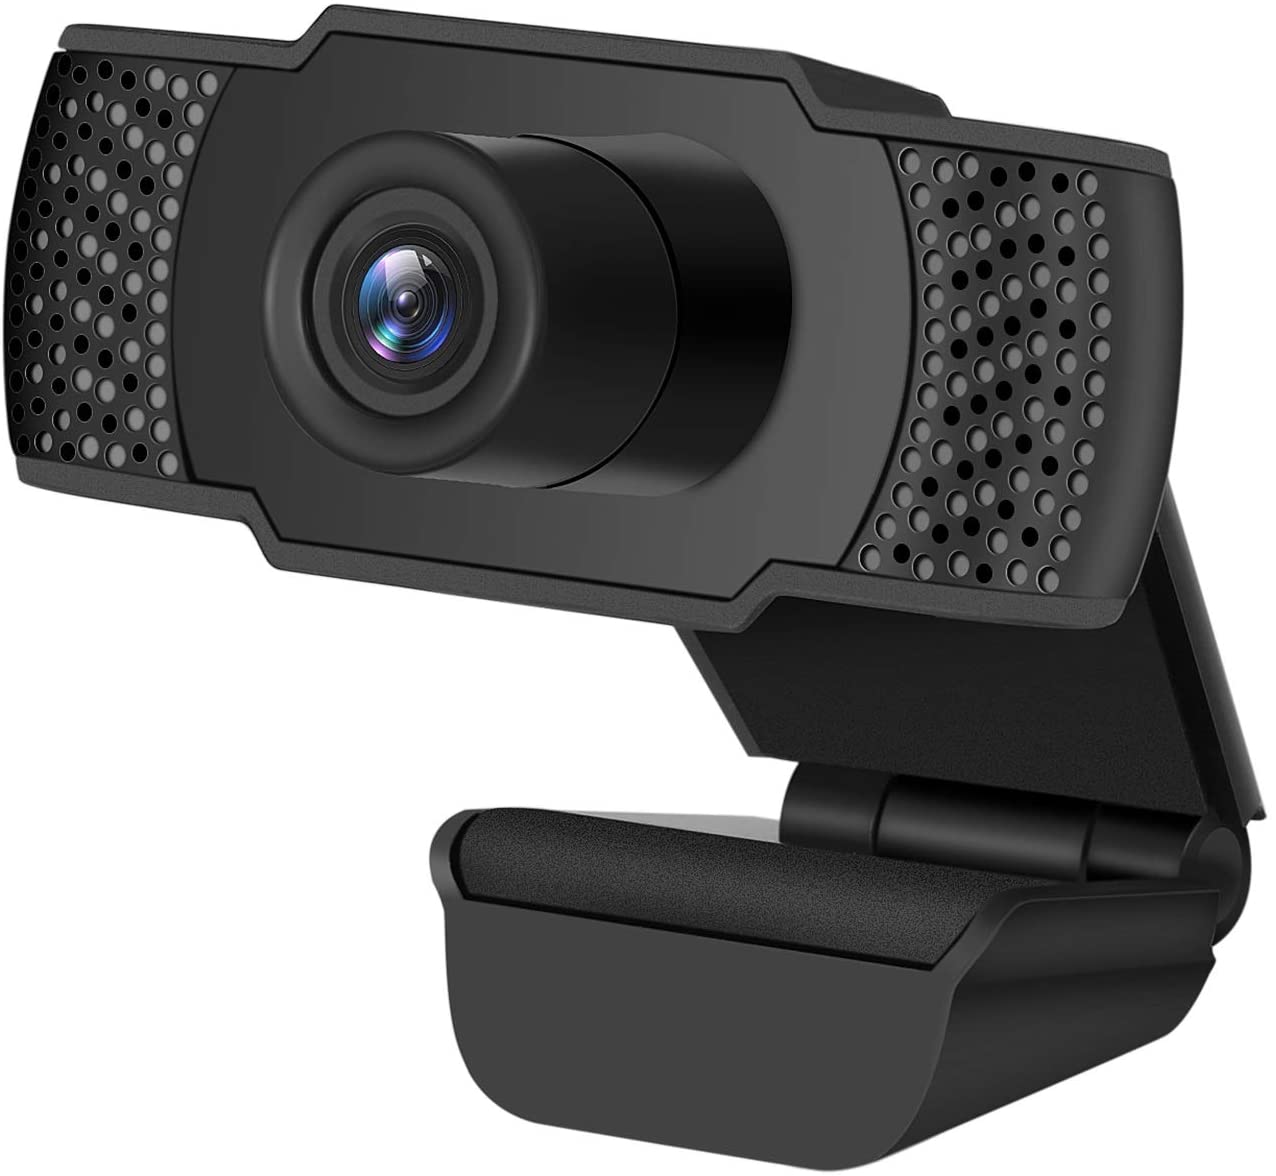 enow - best webcam for yuotube